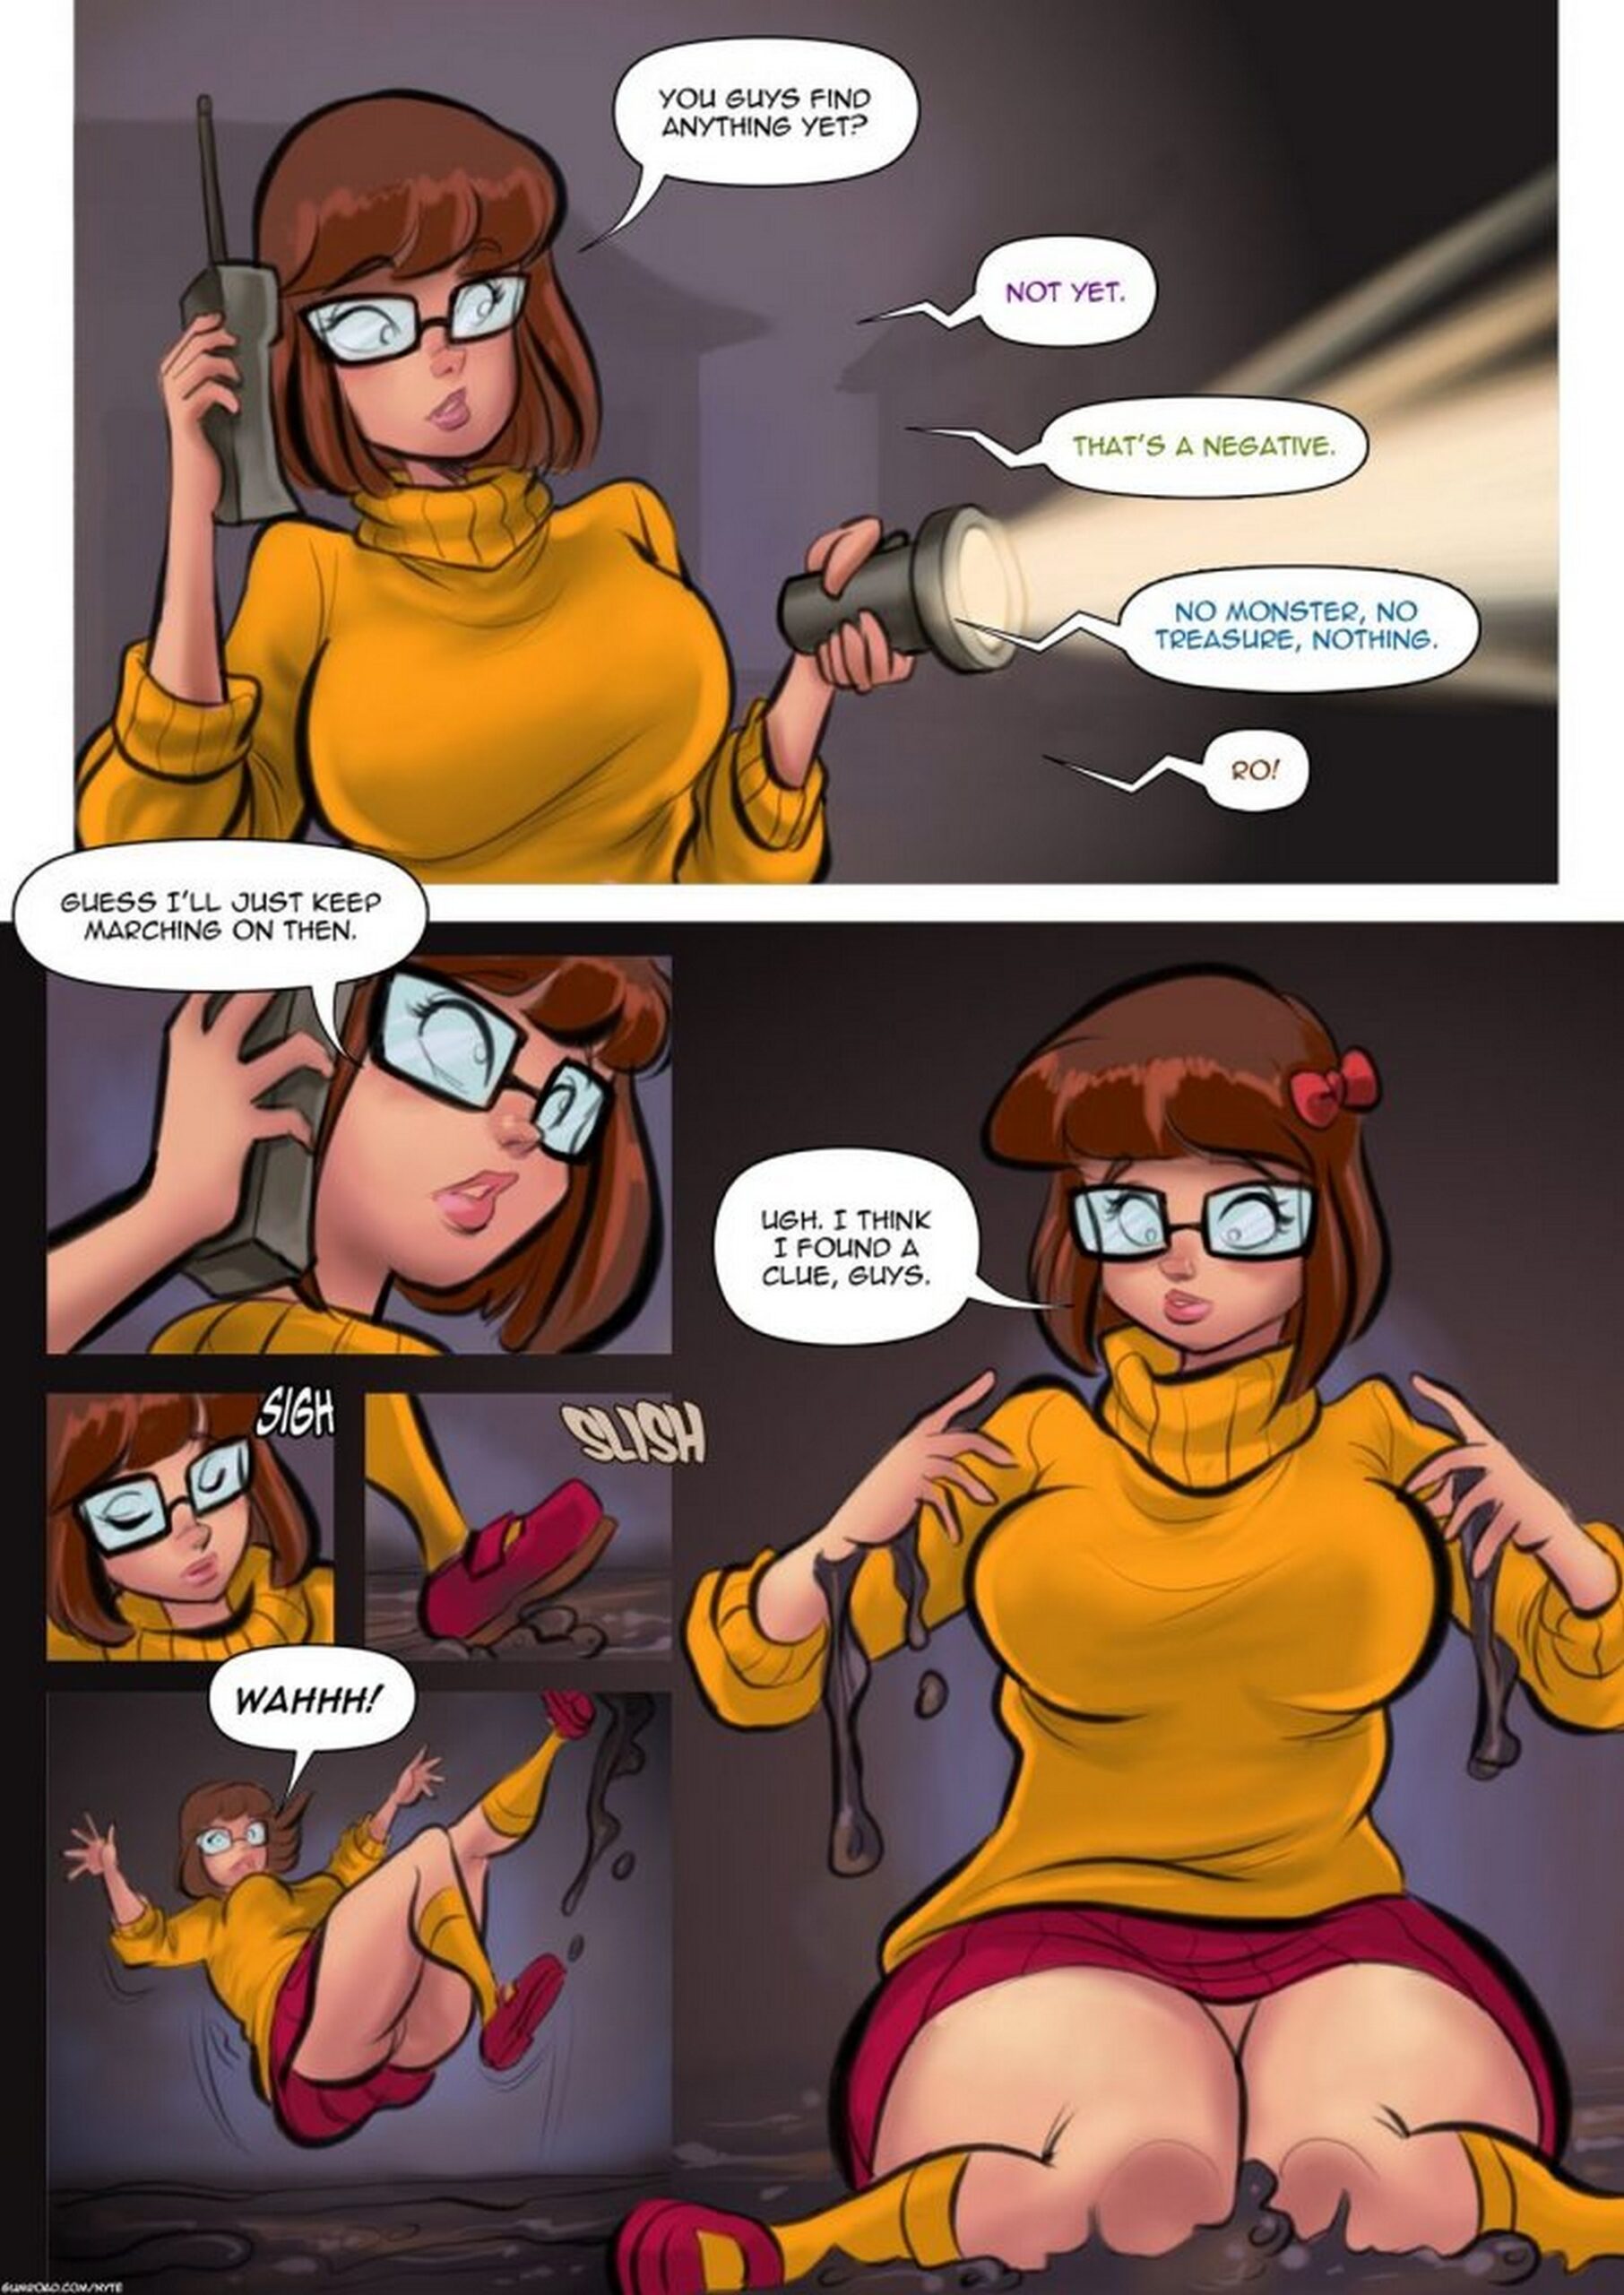 The Mysterious Disappearance of Velma Dinkley - Nyte - KingComiX.com